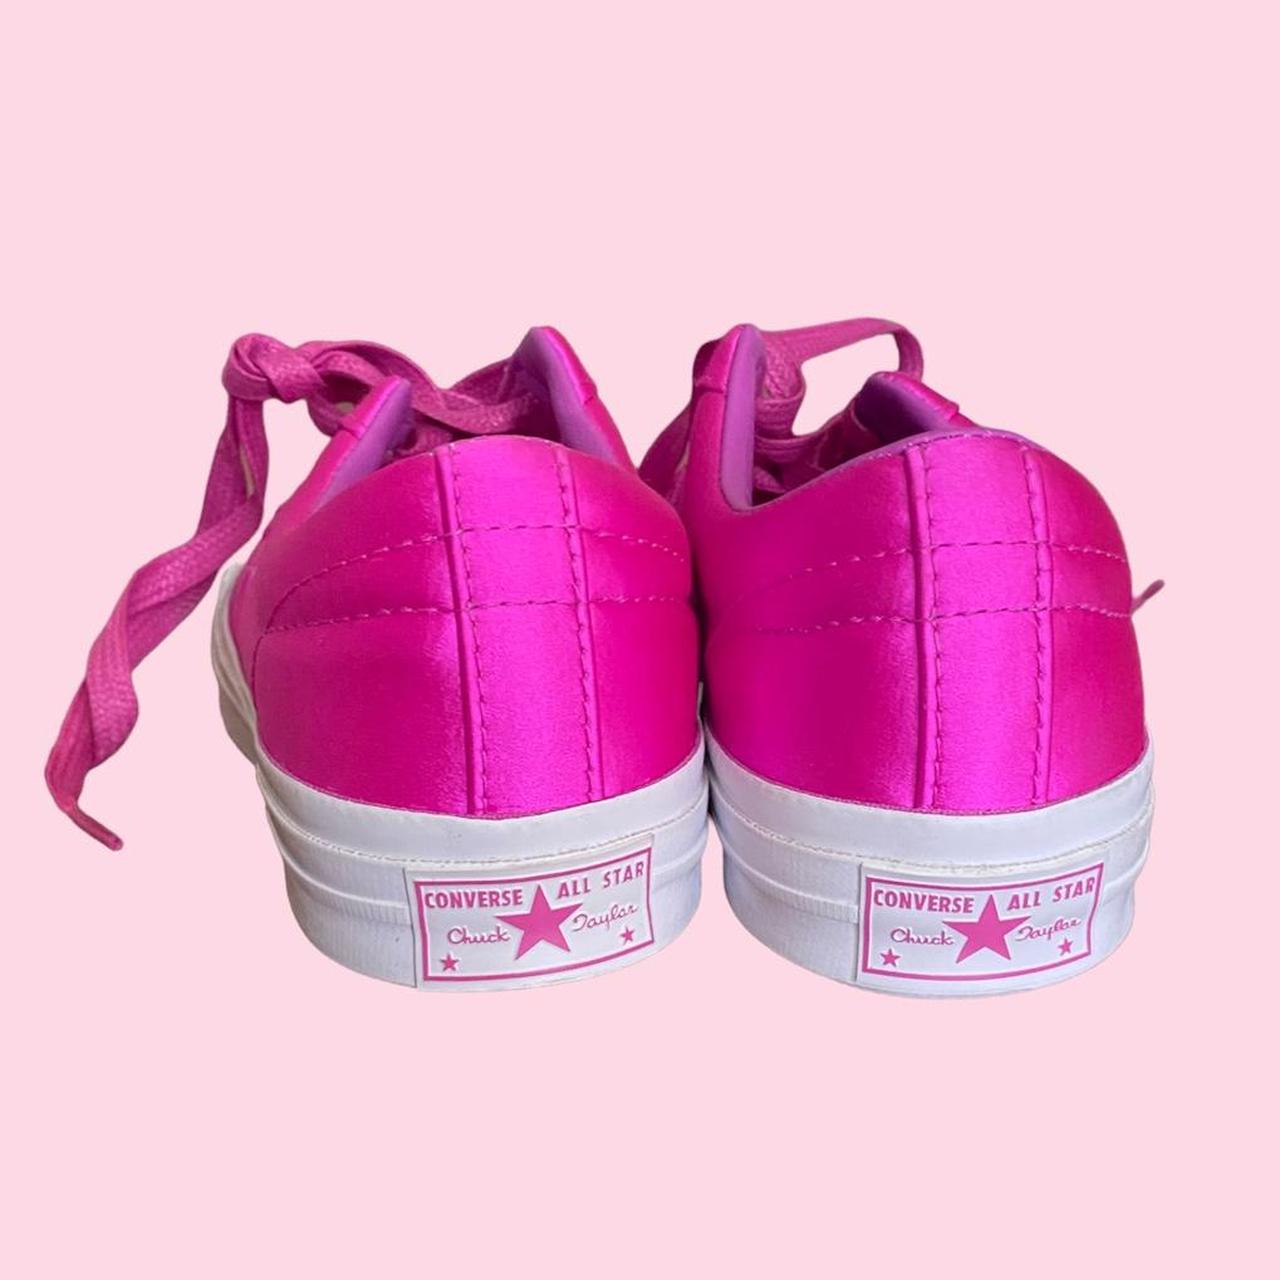 Product Image 2 - Converse one star magenta sneakers
-